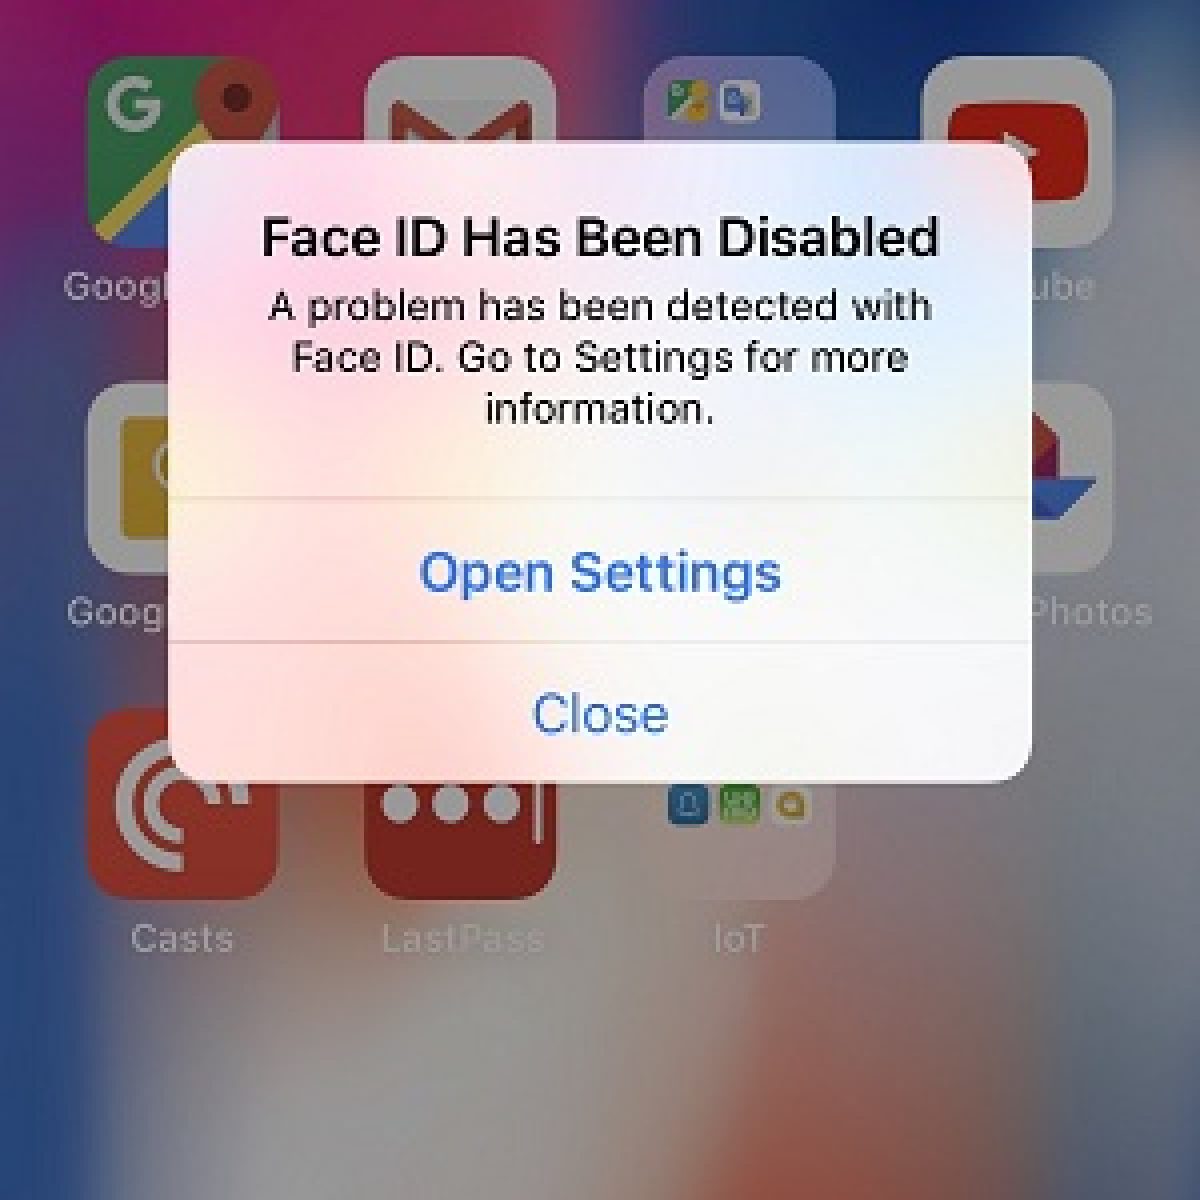 How Face ID gets disabled?